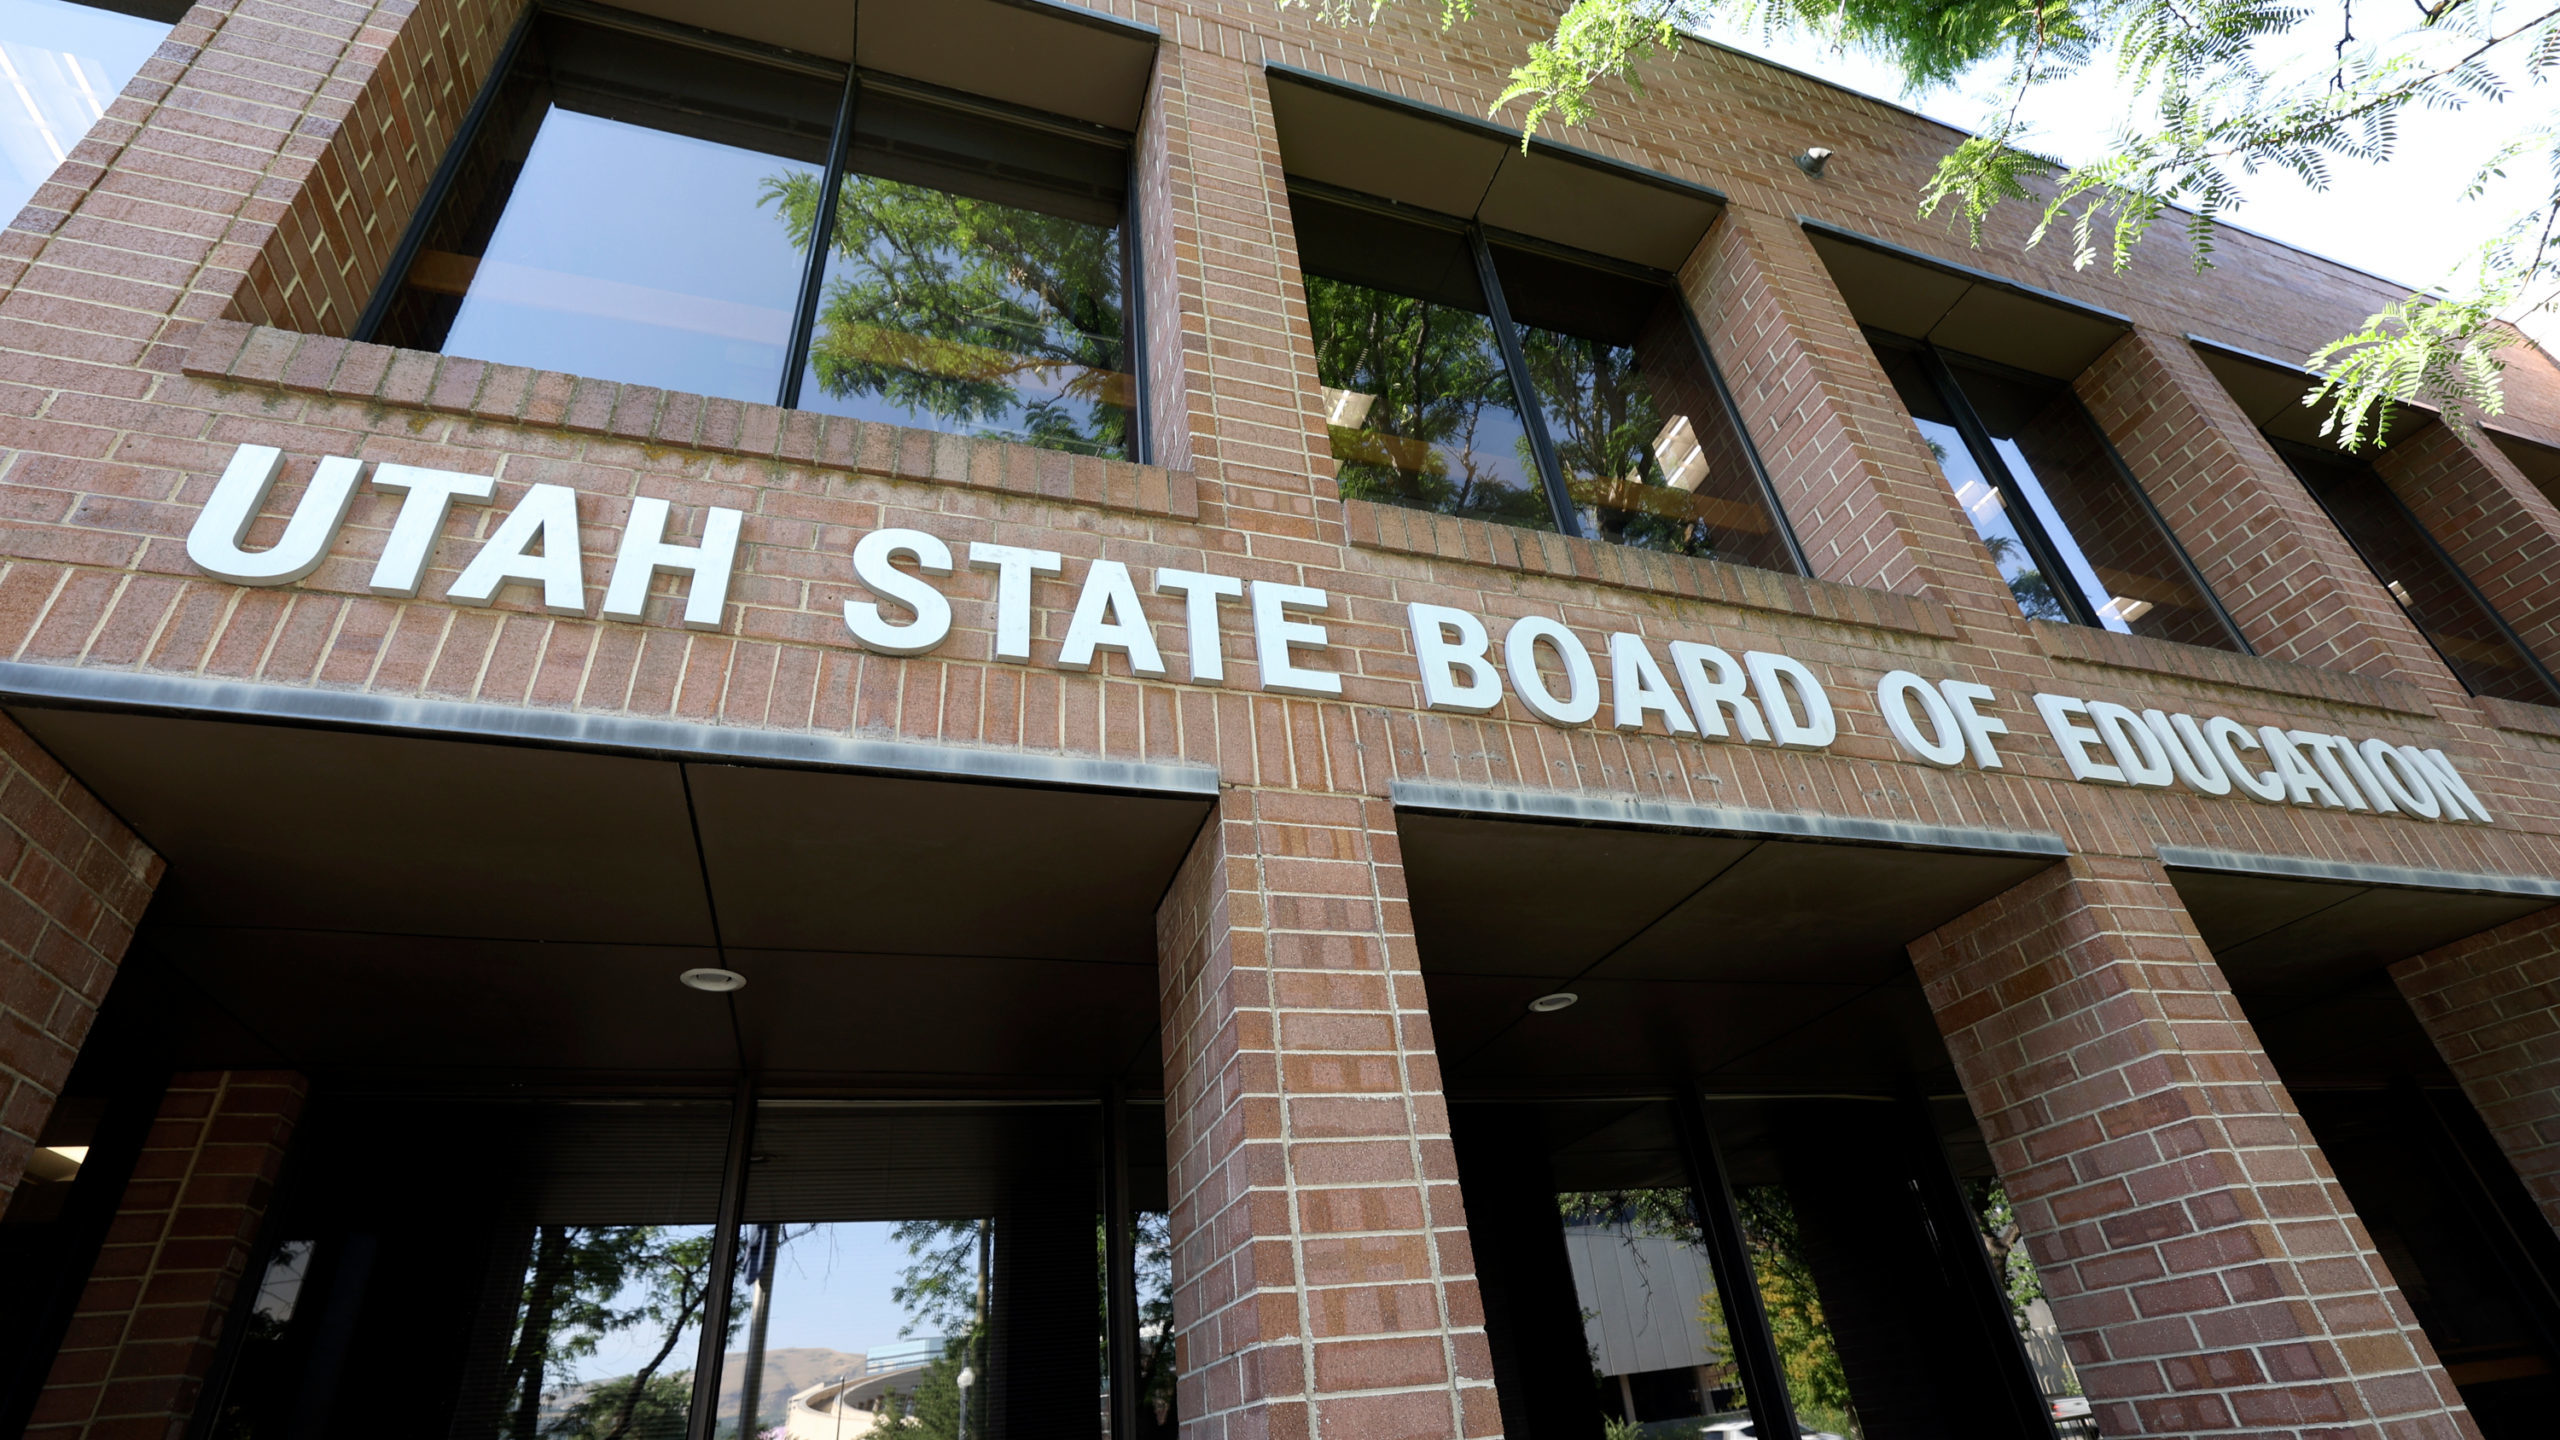 Utah State Board of Education is pictured, the board is investigating board member natalie cline...